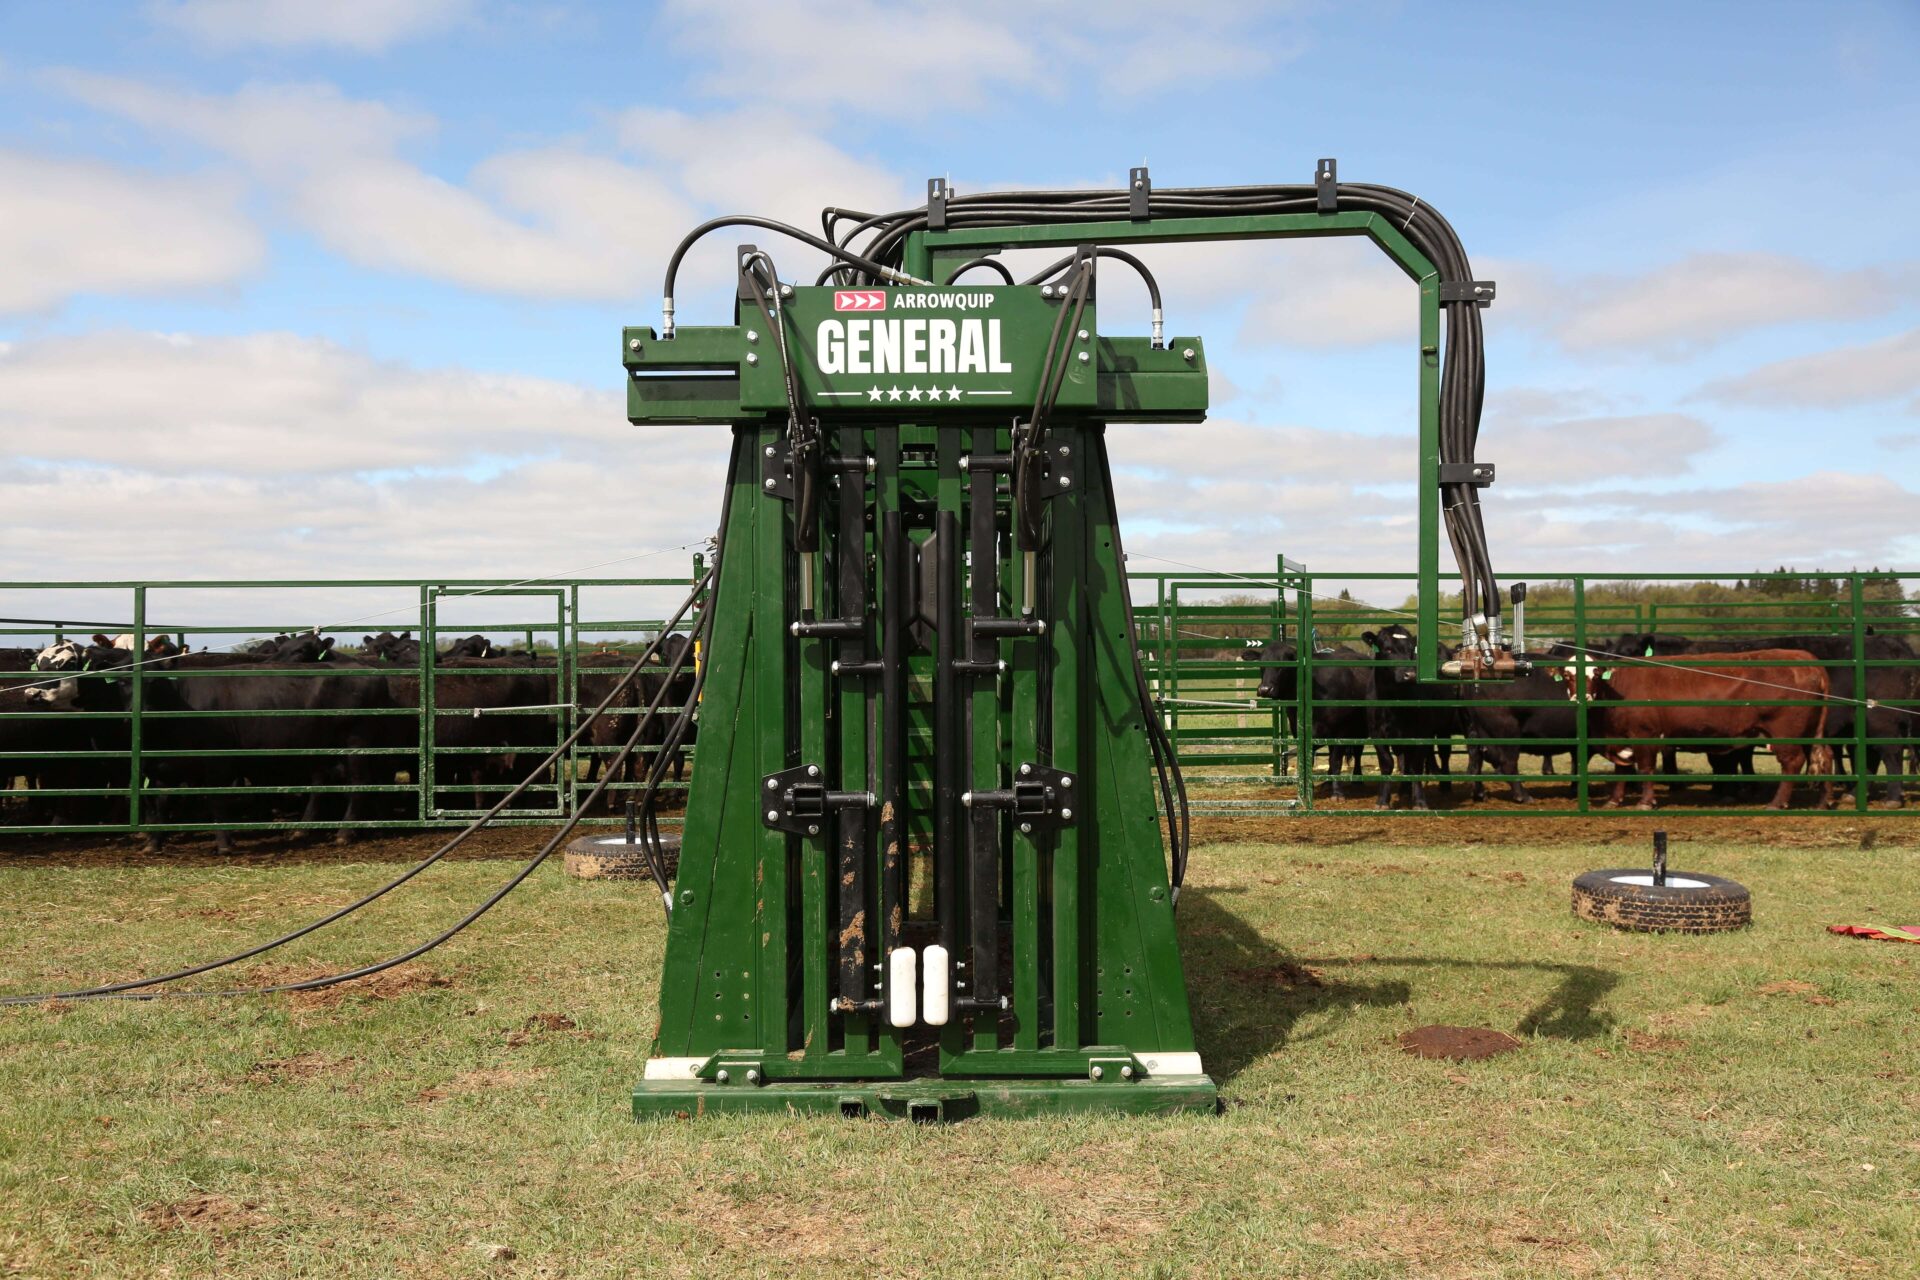 The General hydraulic cattle chute front view with cattle in a corral in the background min